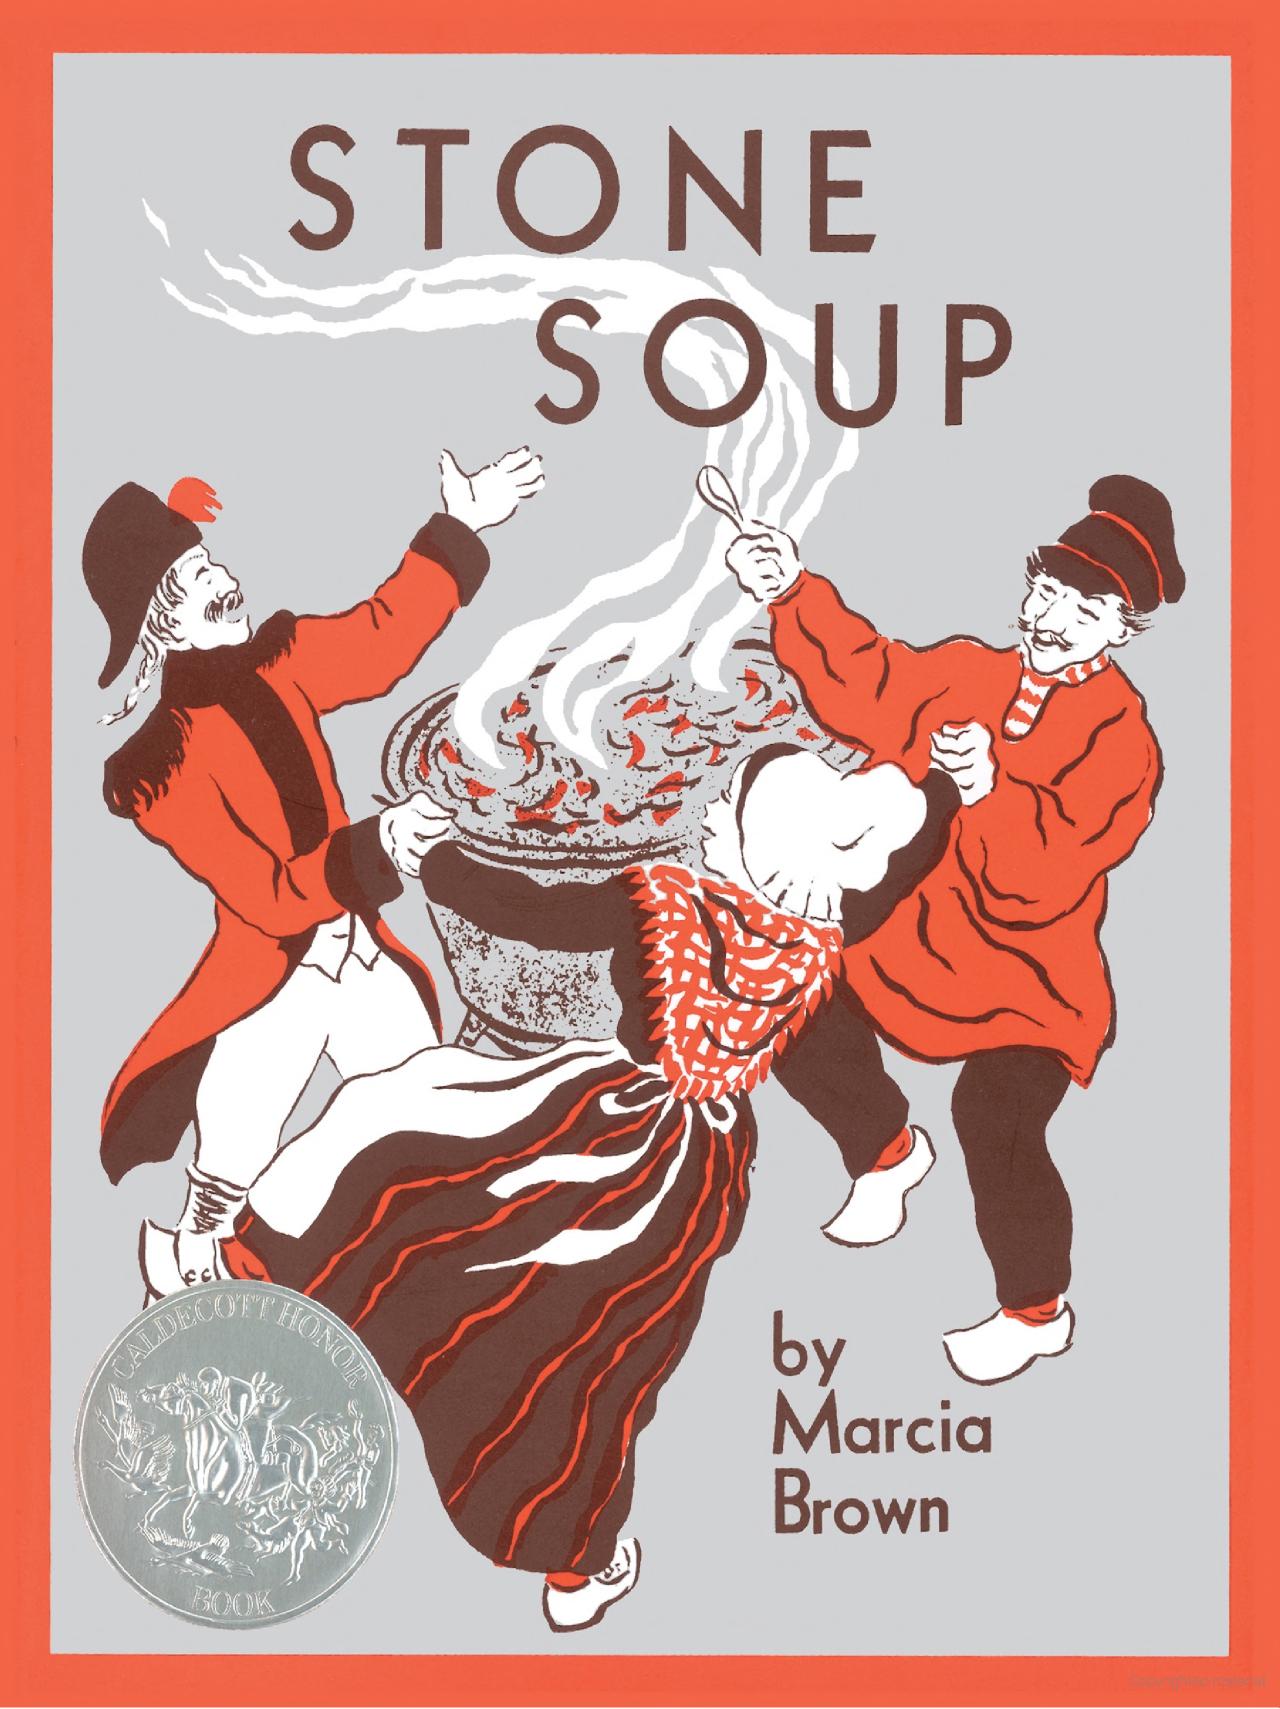 Image of "Stone Soup" Cover